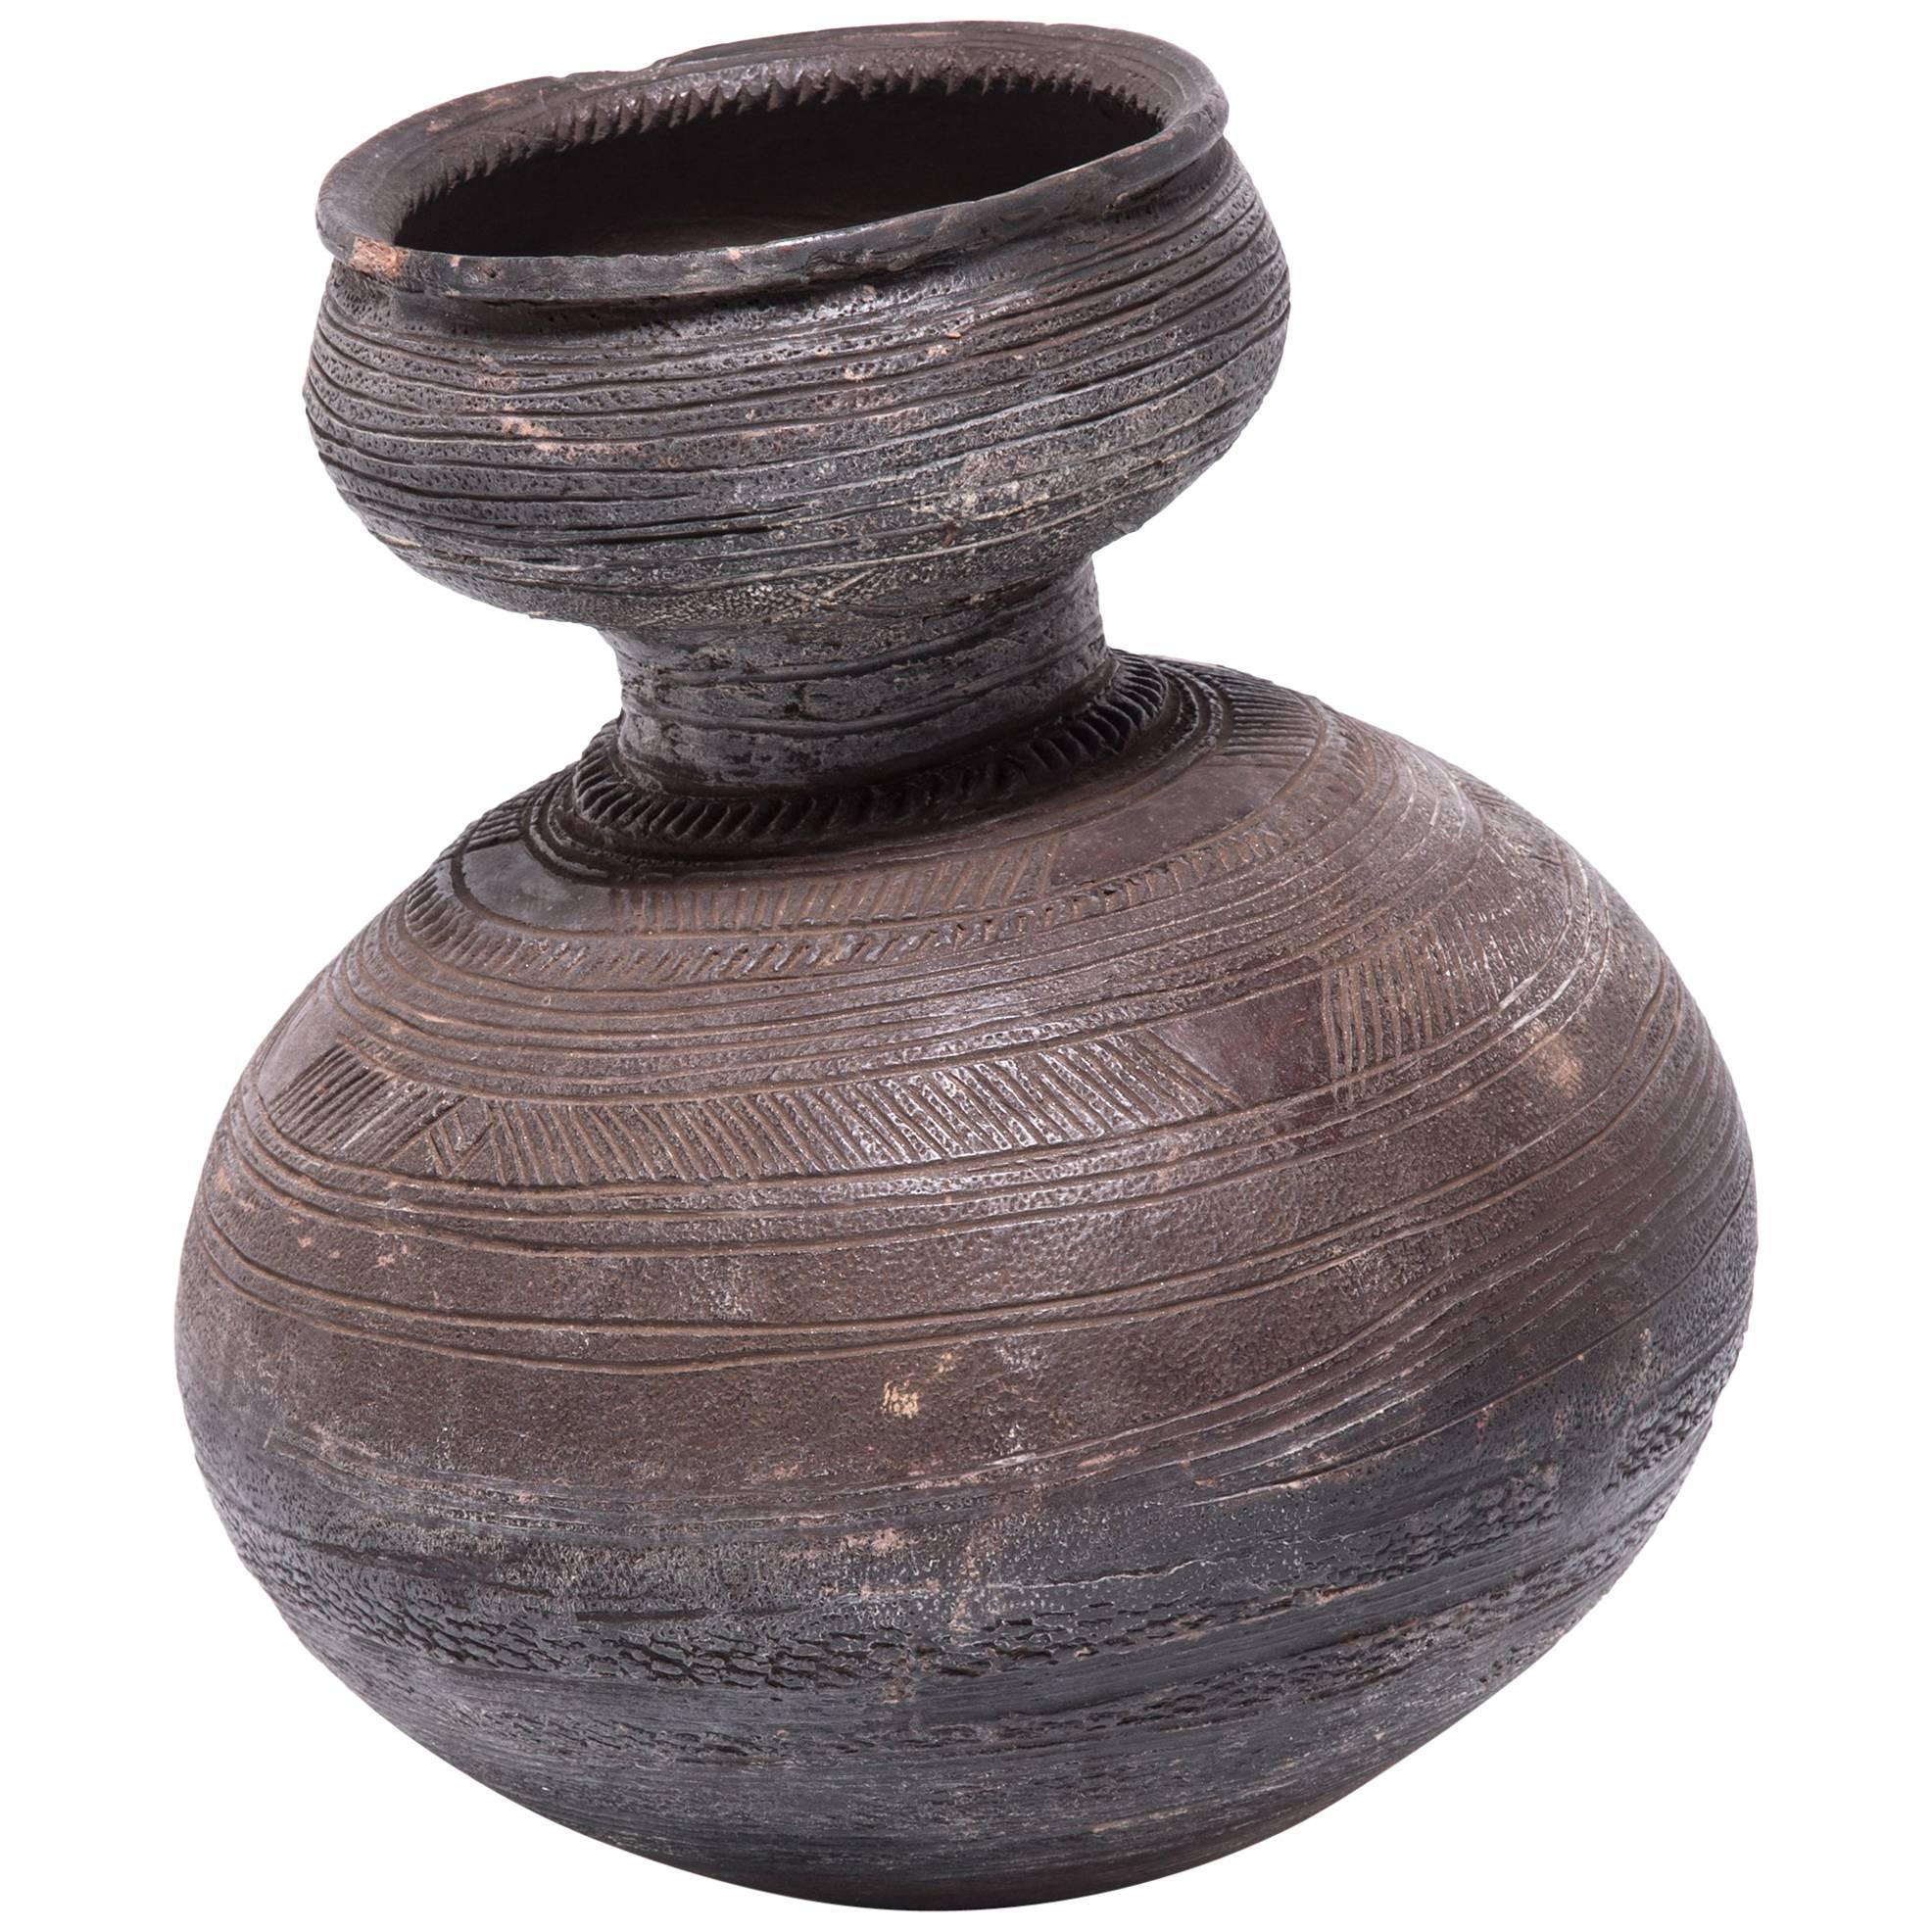 Nupe Gourd Water Vessel, c. 1900 For Sale